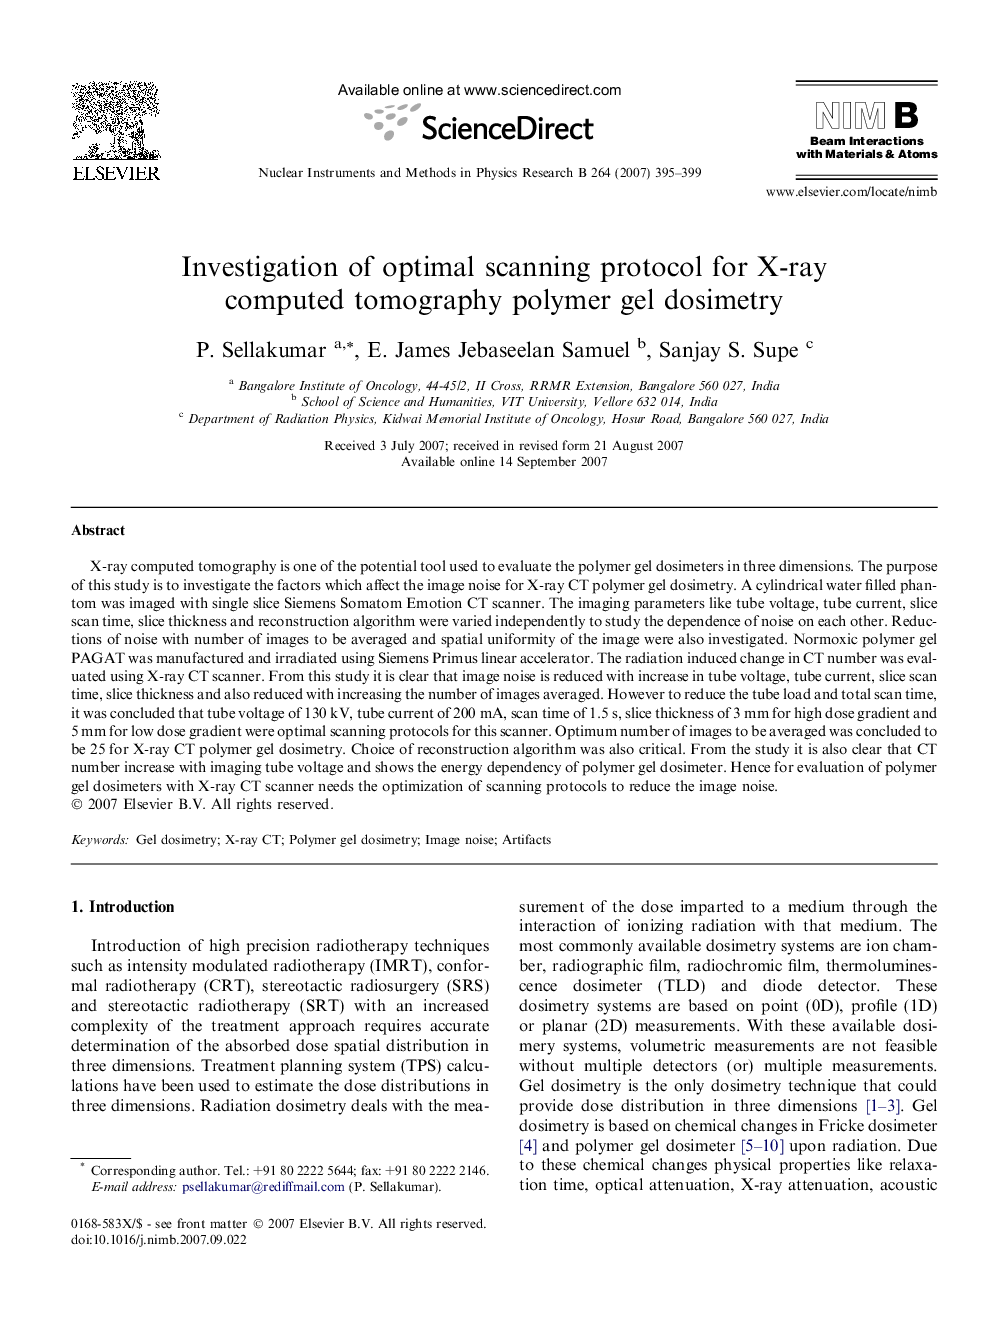 Investigation of optimal scanning protocol for X-ray computed tomography polymer gel dosimetry